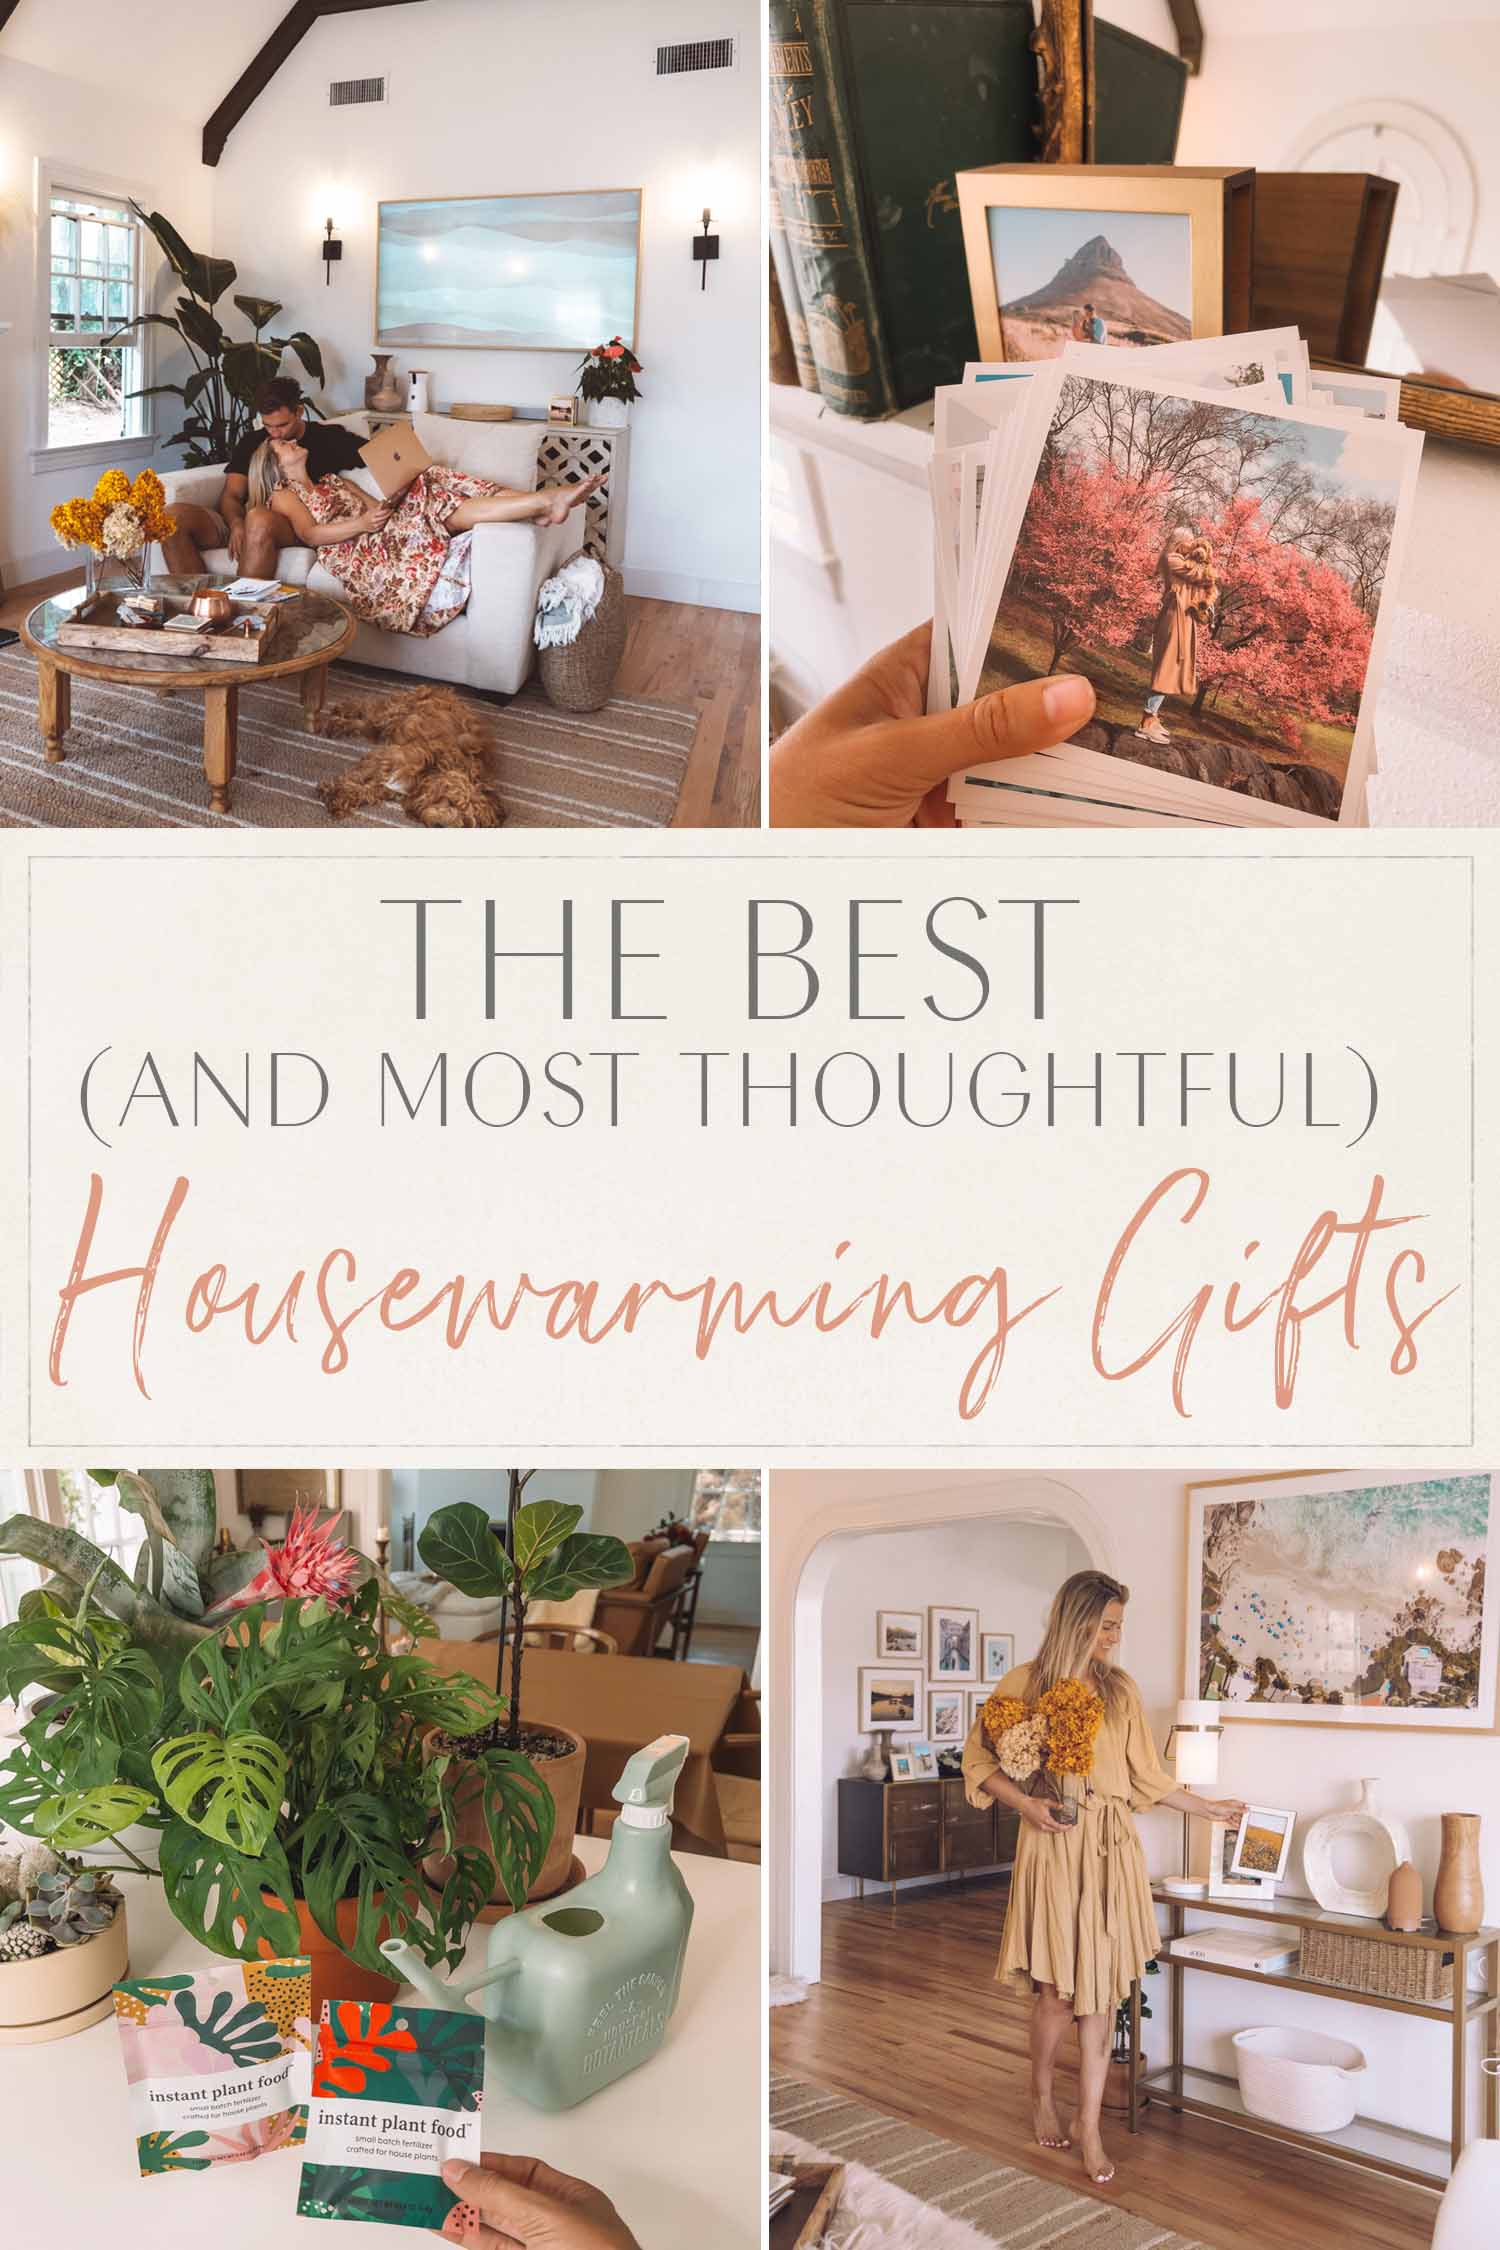 https://www.theblondeabroad.com/wp-content/uploads/2021/07/Best-Most-Thoughtful-Housewarming-Gifts.jpg